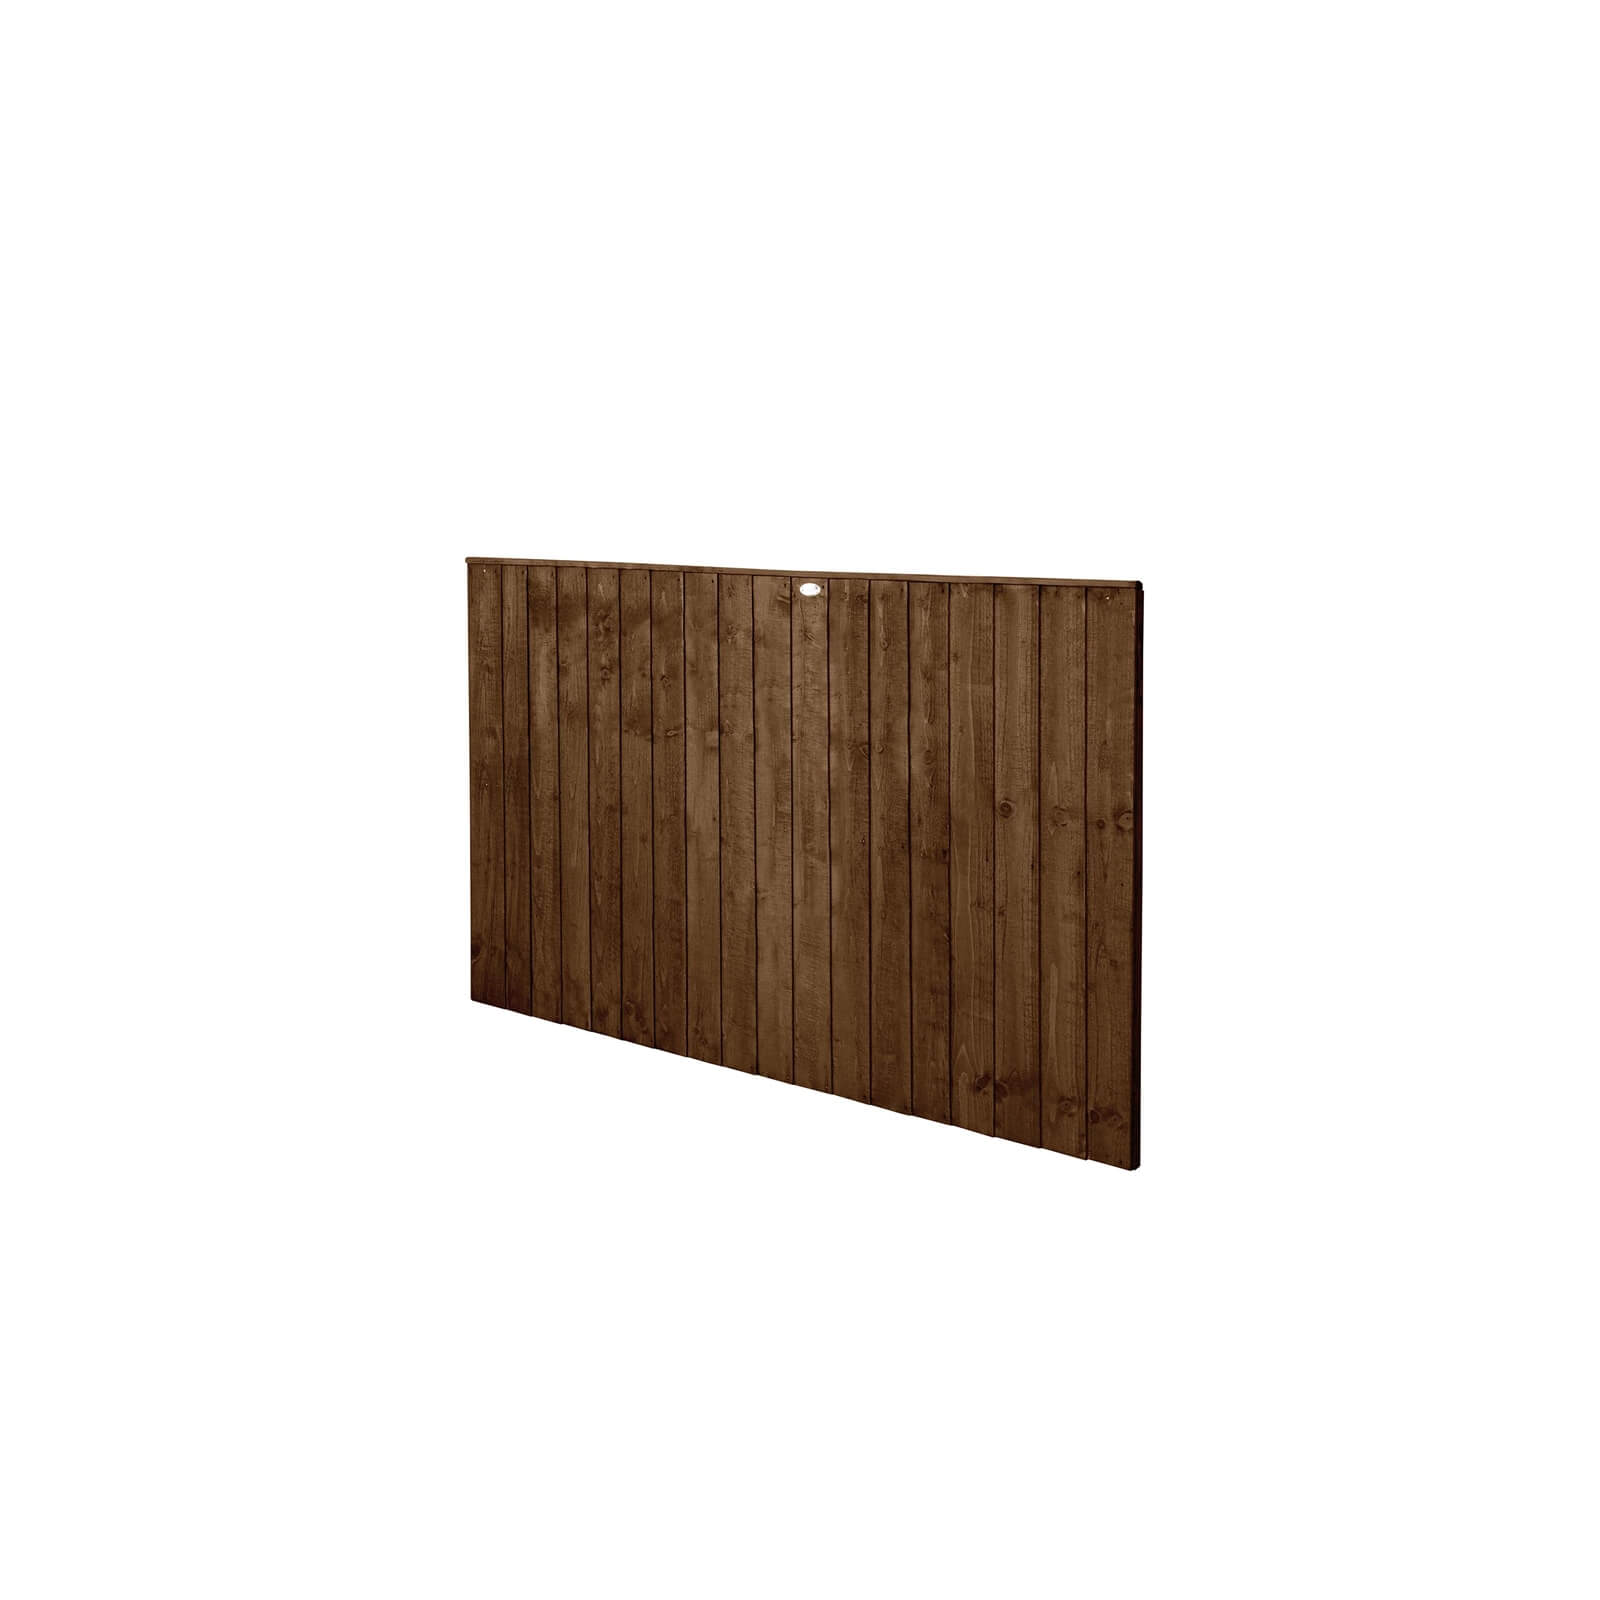 6ft x 4ft (1.83m x 1.23m) Pressure Treated Featheredge Fence Panel (Dark Brown) - Pack of 5